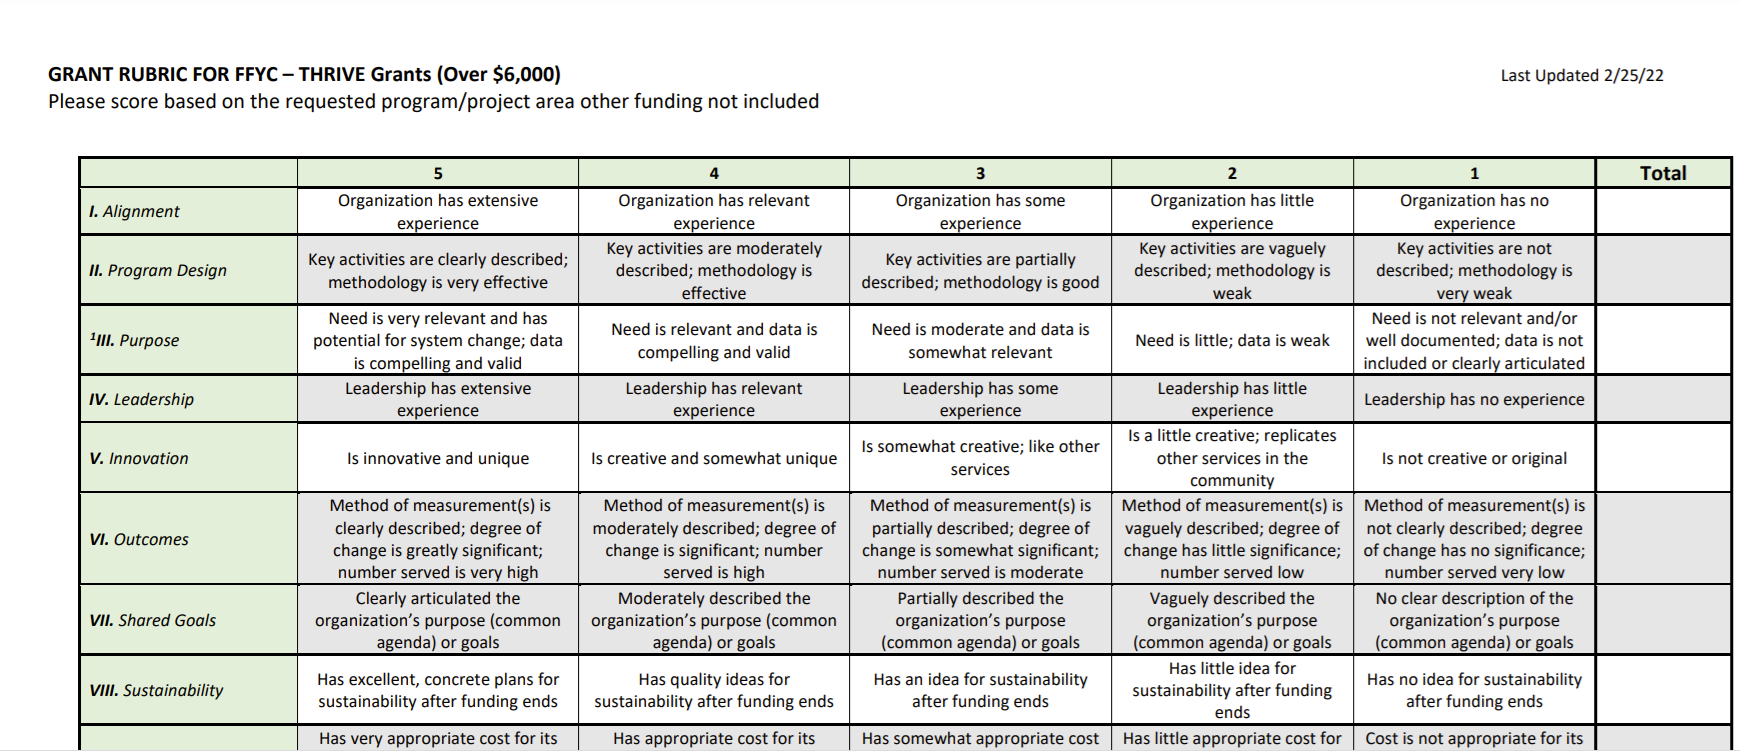 THRIVE Grant Rubric (Over $6,000)